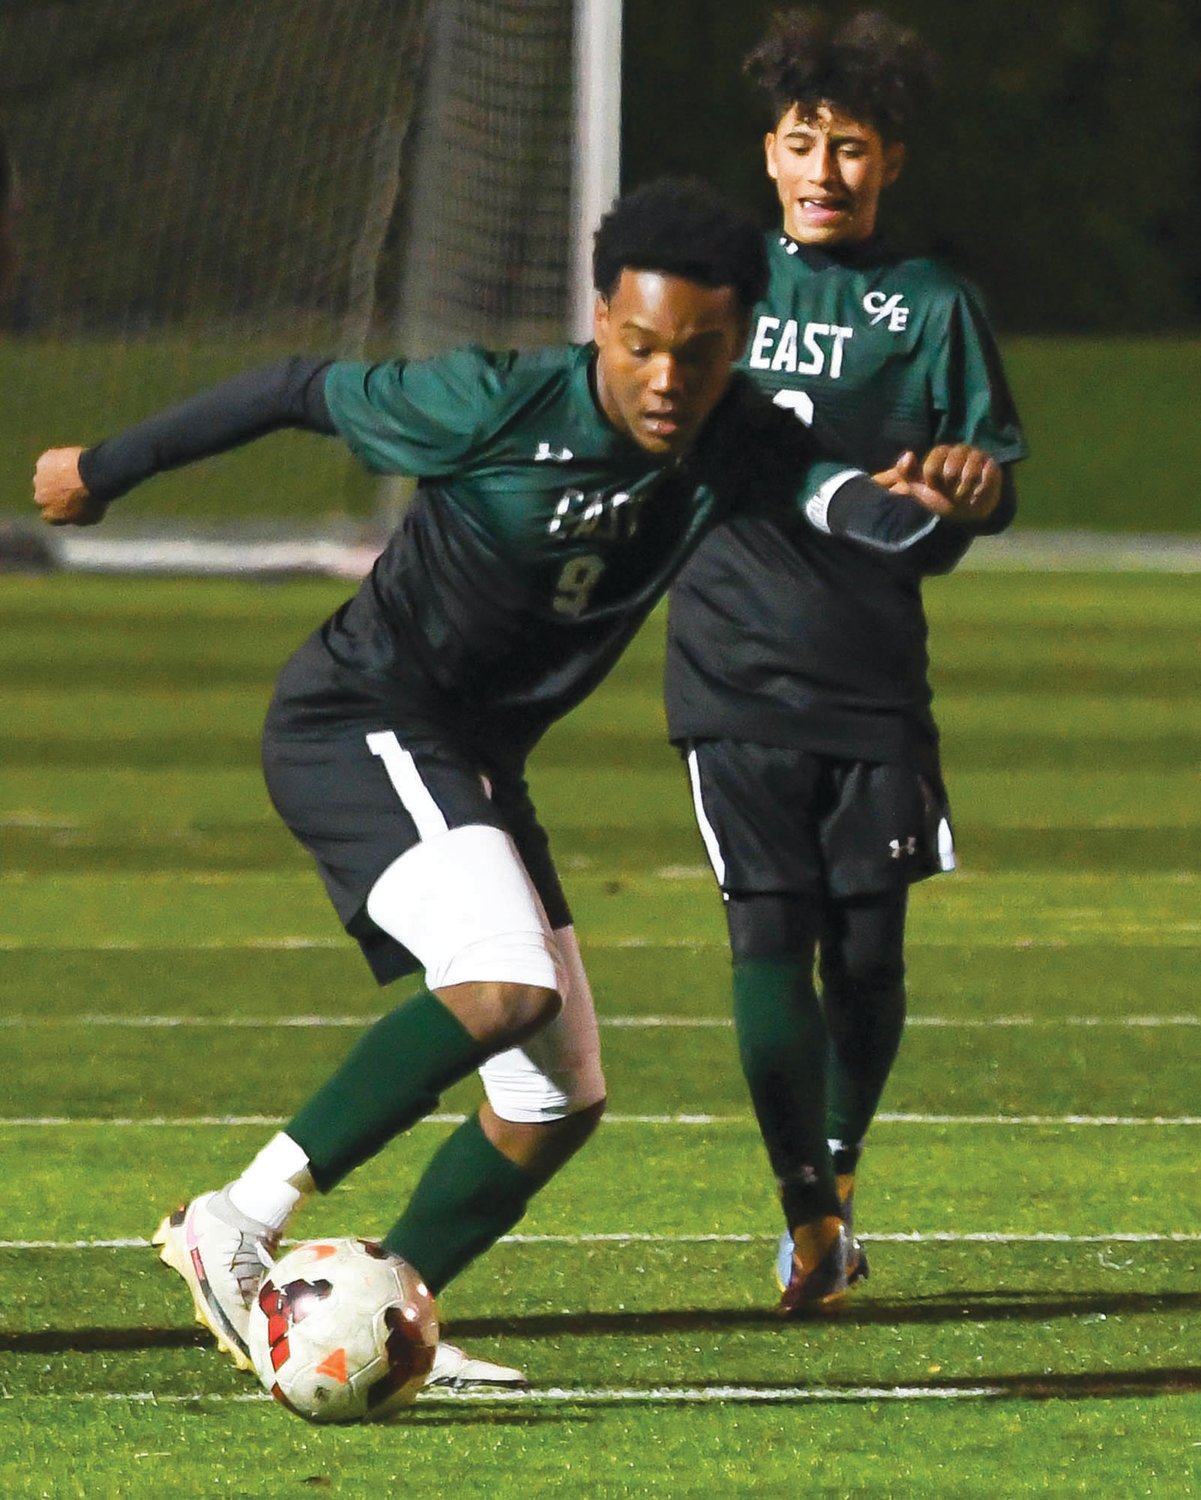 PLAYOFF BOUND: Christian Mestre works his way up the field against Toll Gate.